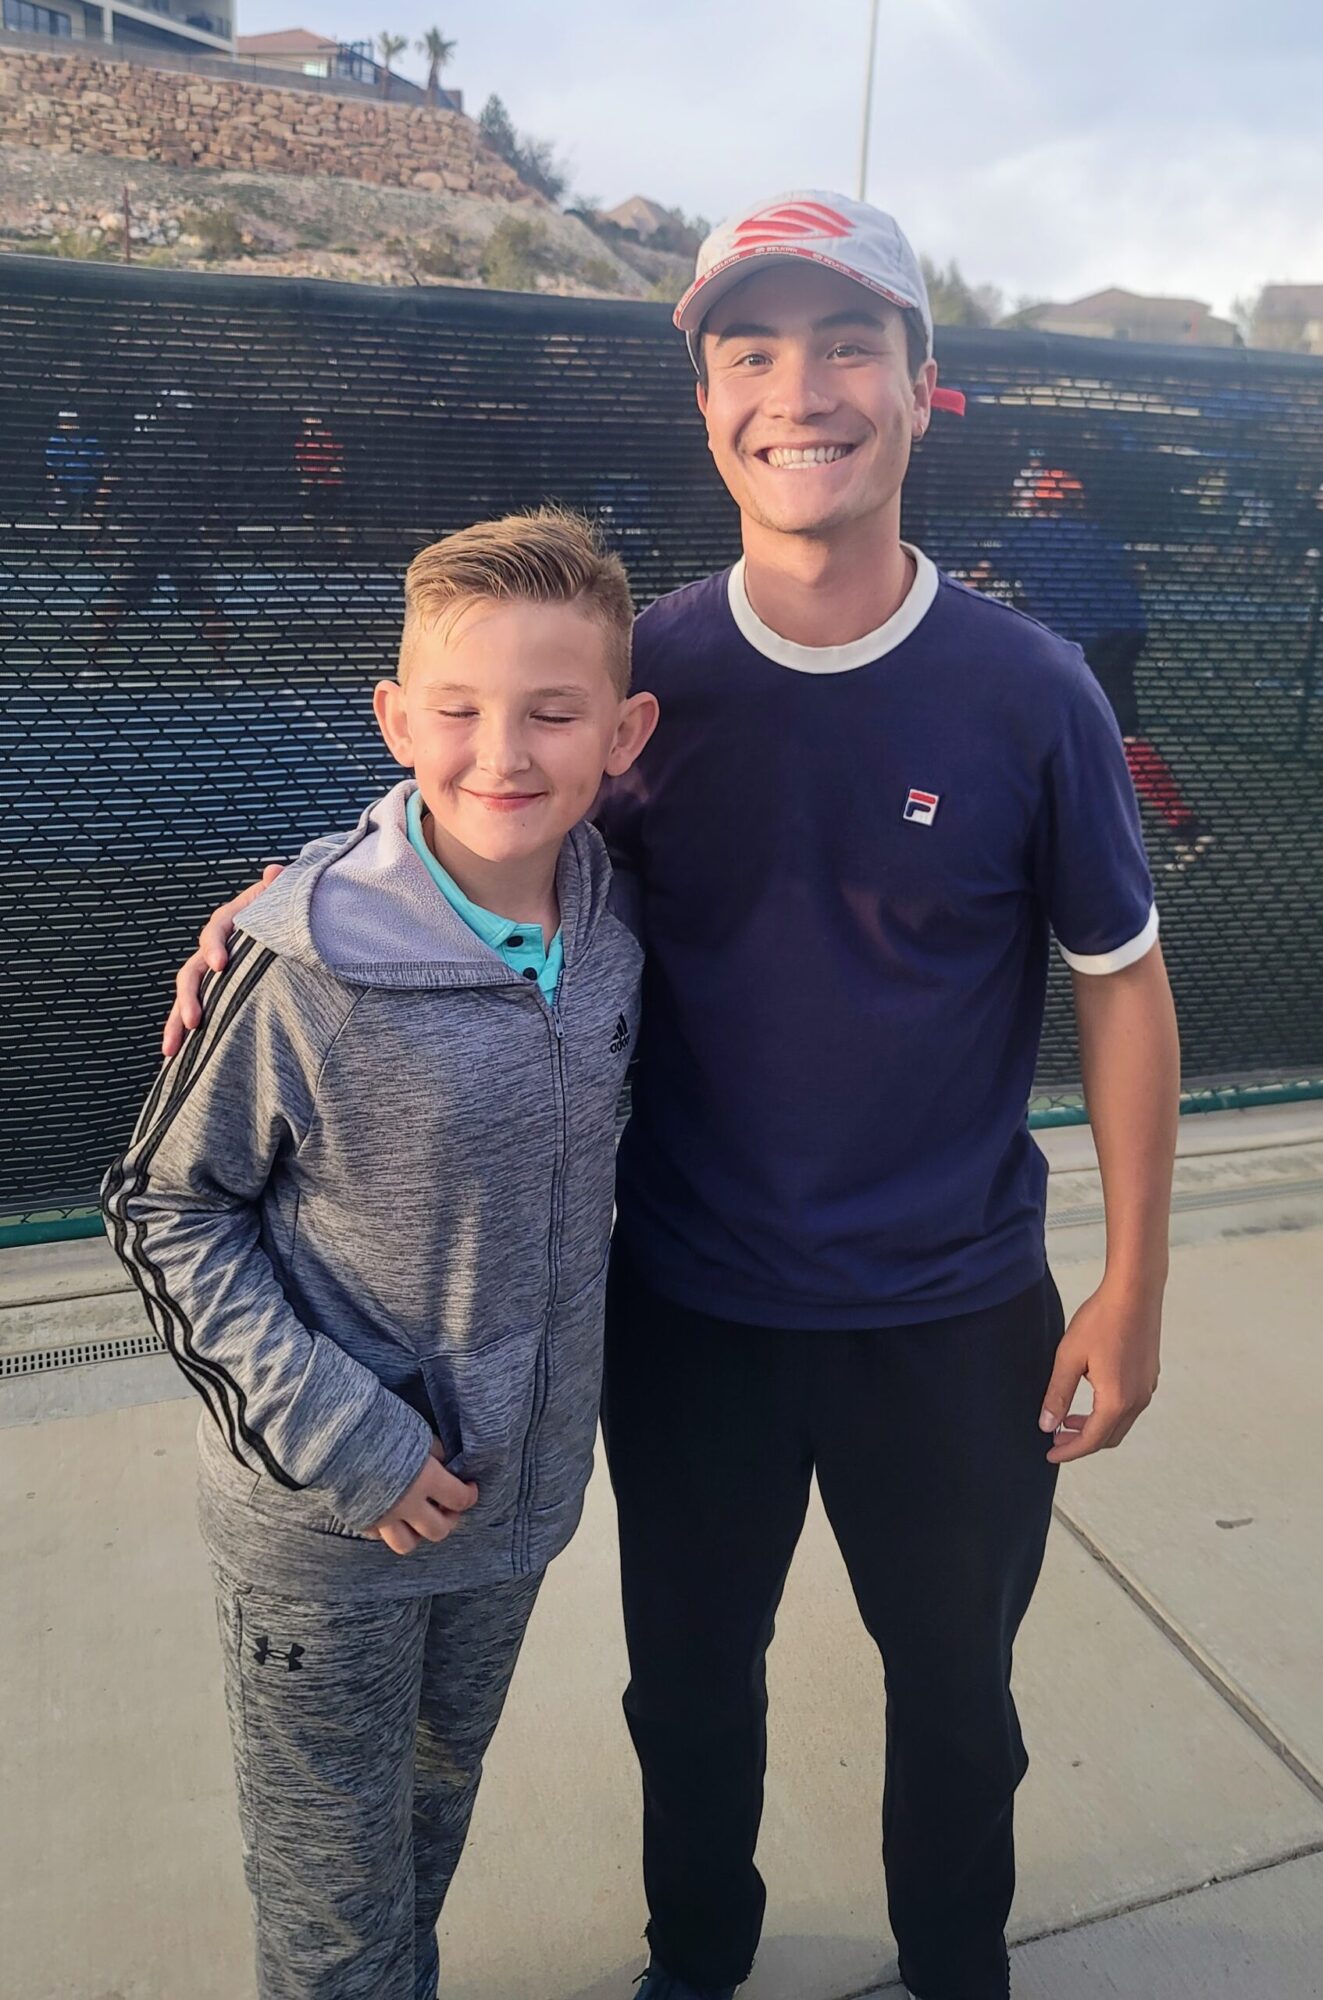 Caden Nemoff of Brioness Pickleball Podcast took a picture with Jett!